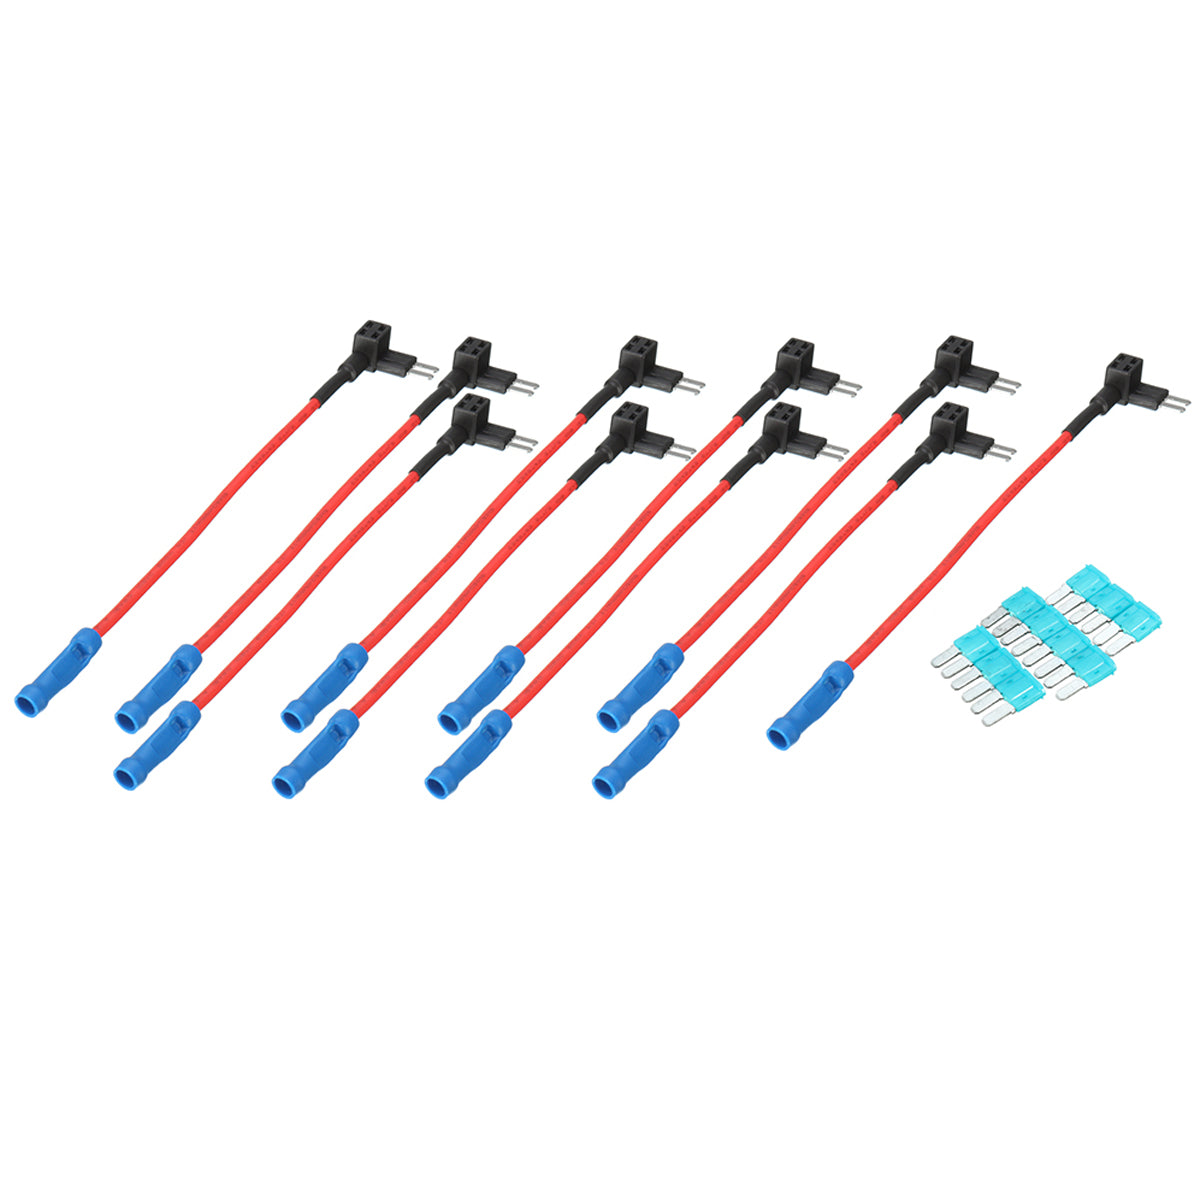 10PCS Car Fuse Adapter Tap Dual Circuit Adapter Holder for Truck Auto - Auto GoShop